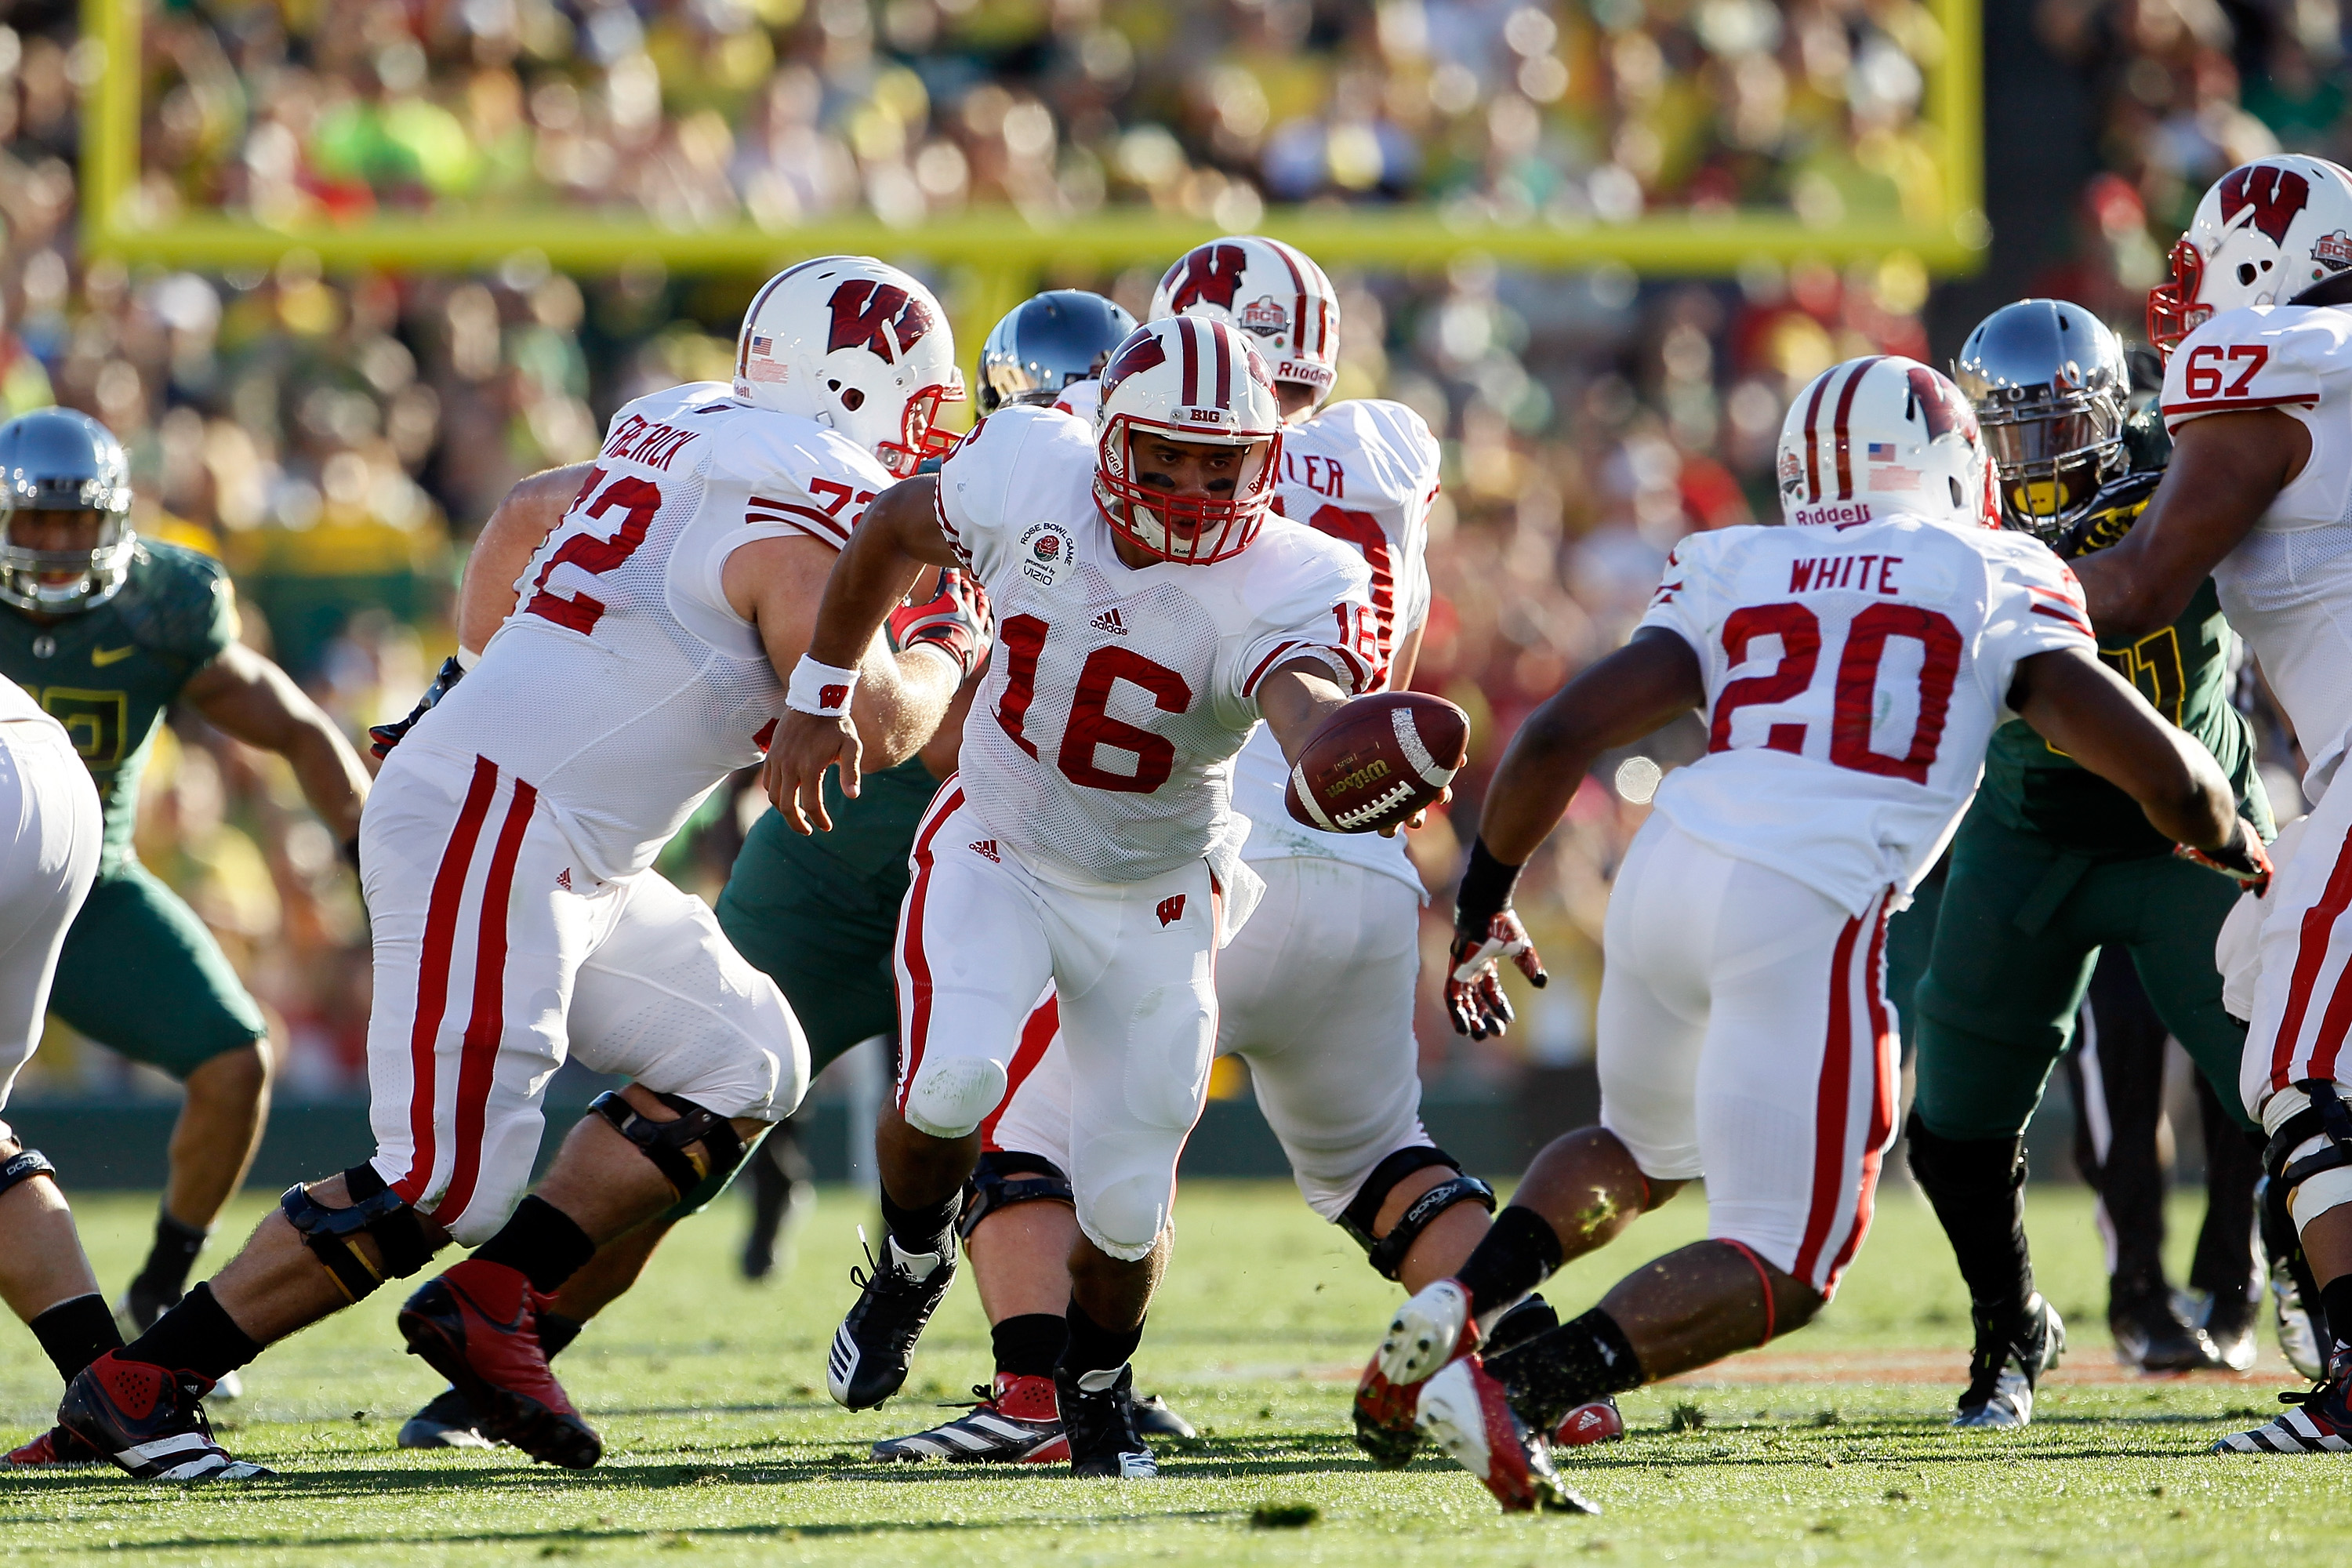 Wisconsin Quarterback Russell Wilson fakes a handoff to running back James White against Oregon Ducks in the 98th Rose Bowl.  (Photo by Jeff Gross/Getty Images)